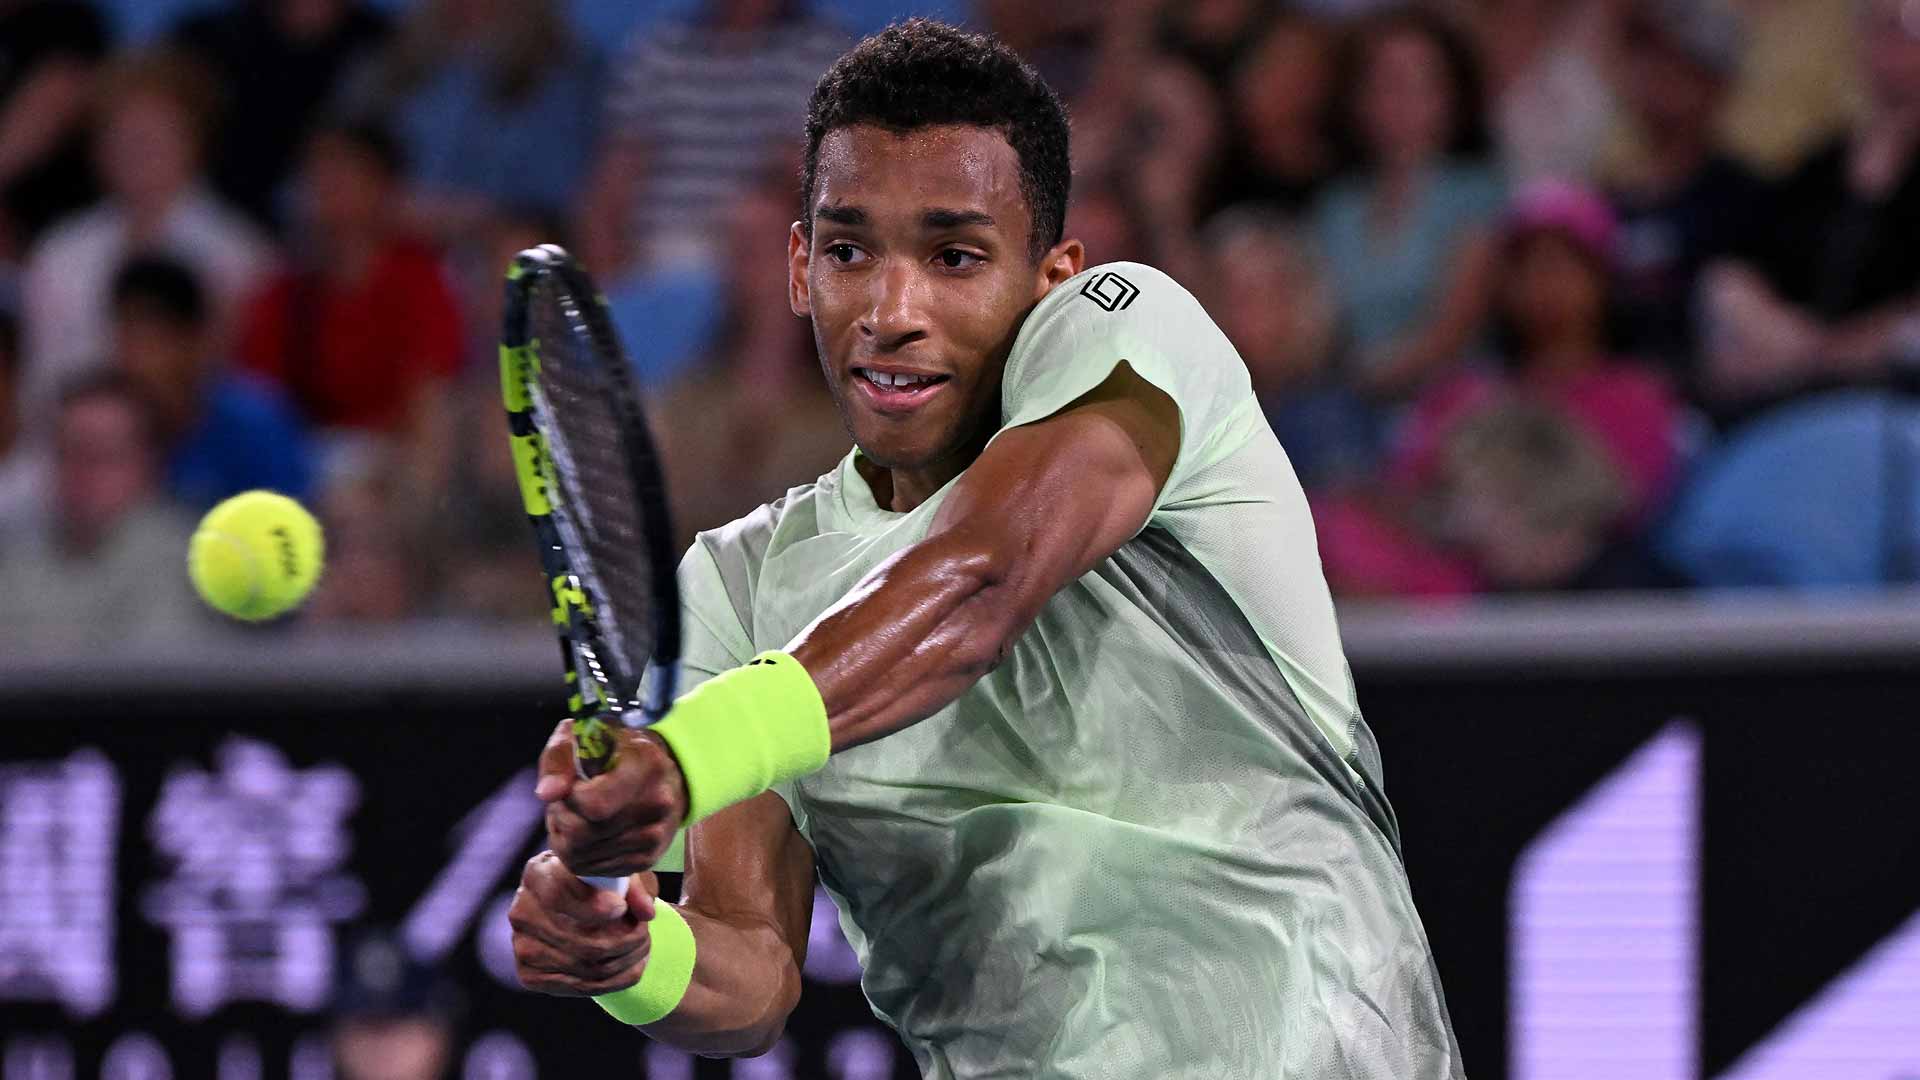 Felix Auger-Aliassime in action against Dominic Thiem on Monday at the Australian Open in Melbourne.